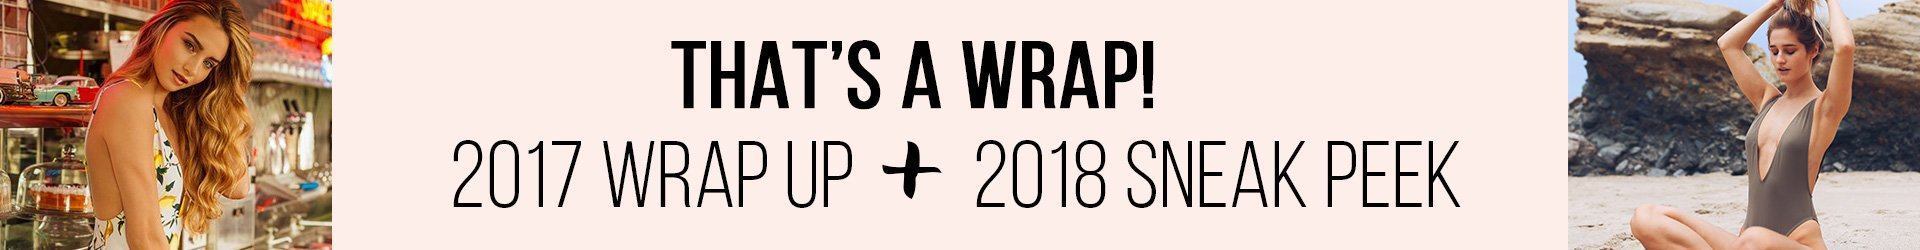 • GOODBYE 2017, HELLO 2018! - DIPPIN'S DAISYS' WRAP UP AND SNEAK PEEK